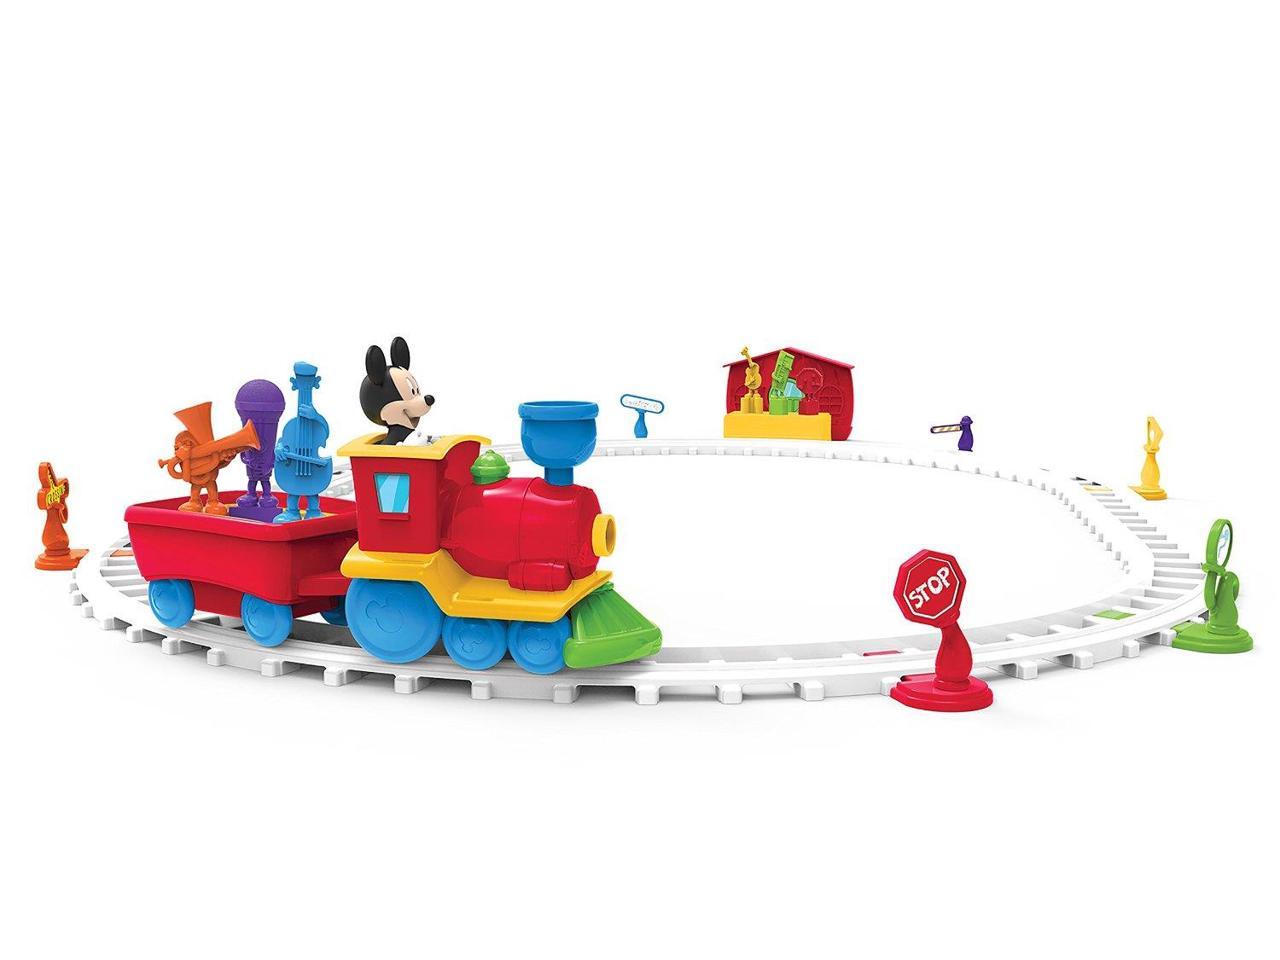 Disney Mickey Mouse Imagicademy Rocket Builder Playset for sale online